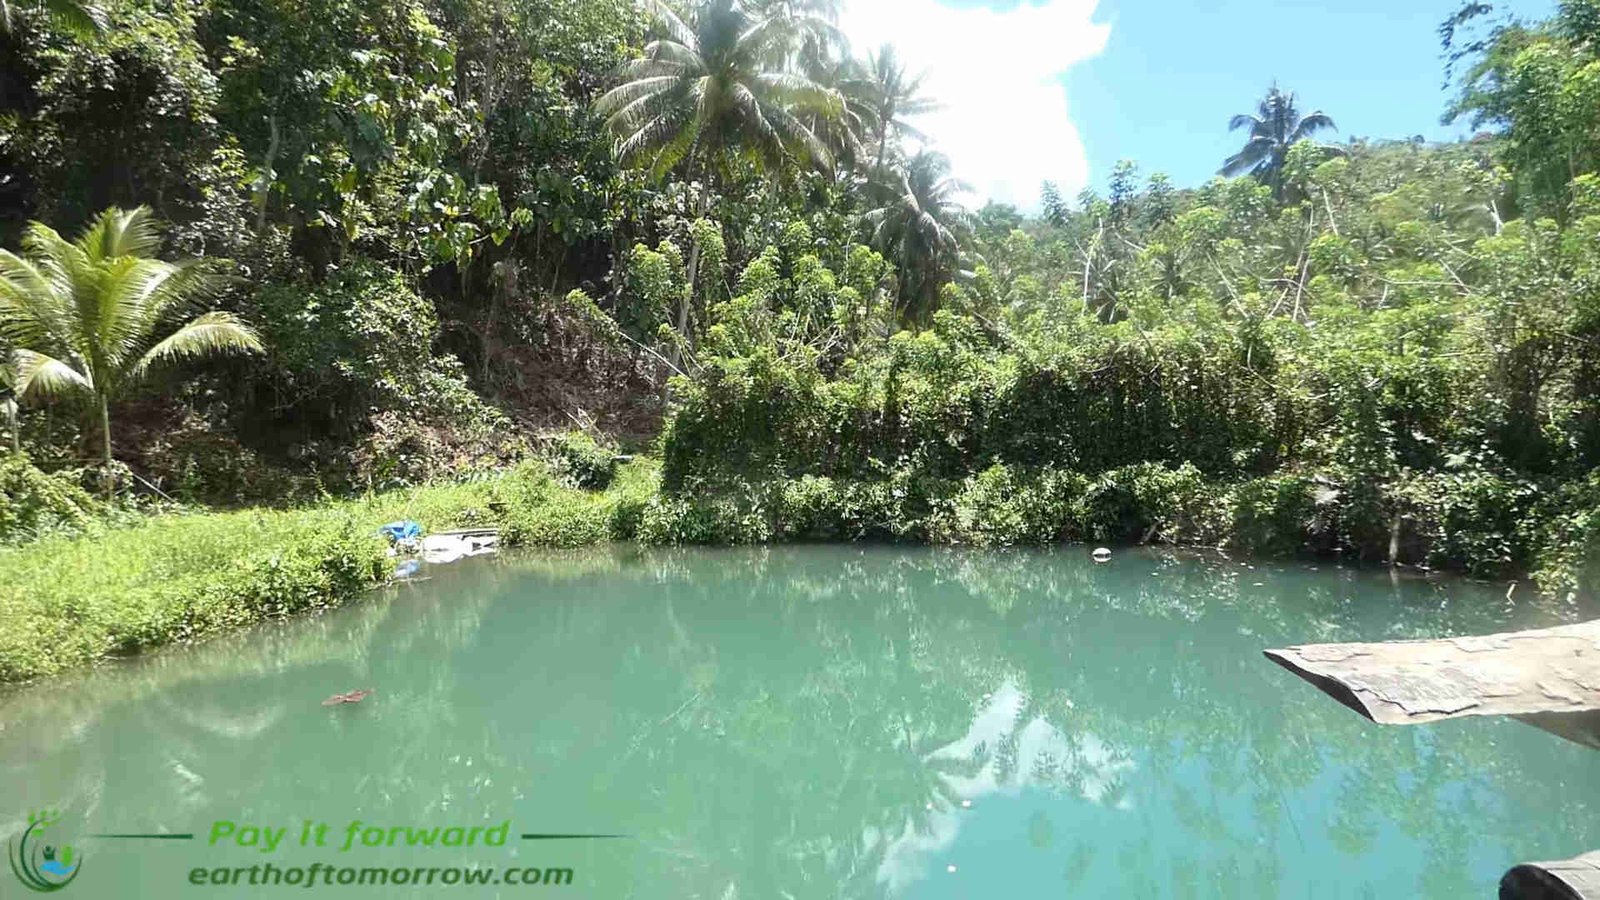 We review the secret lagoon in Siquijor